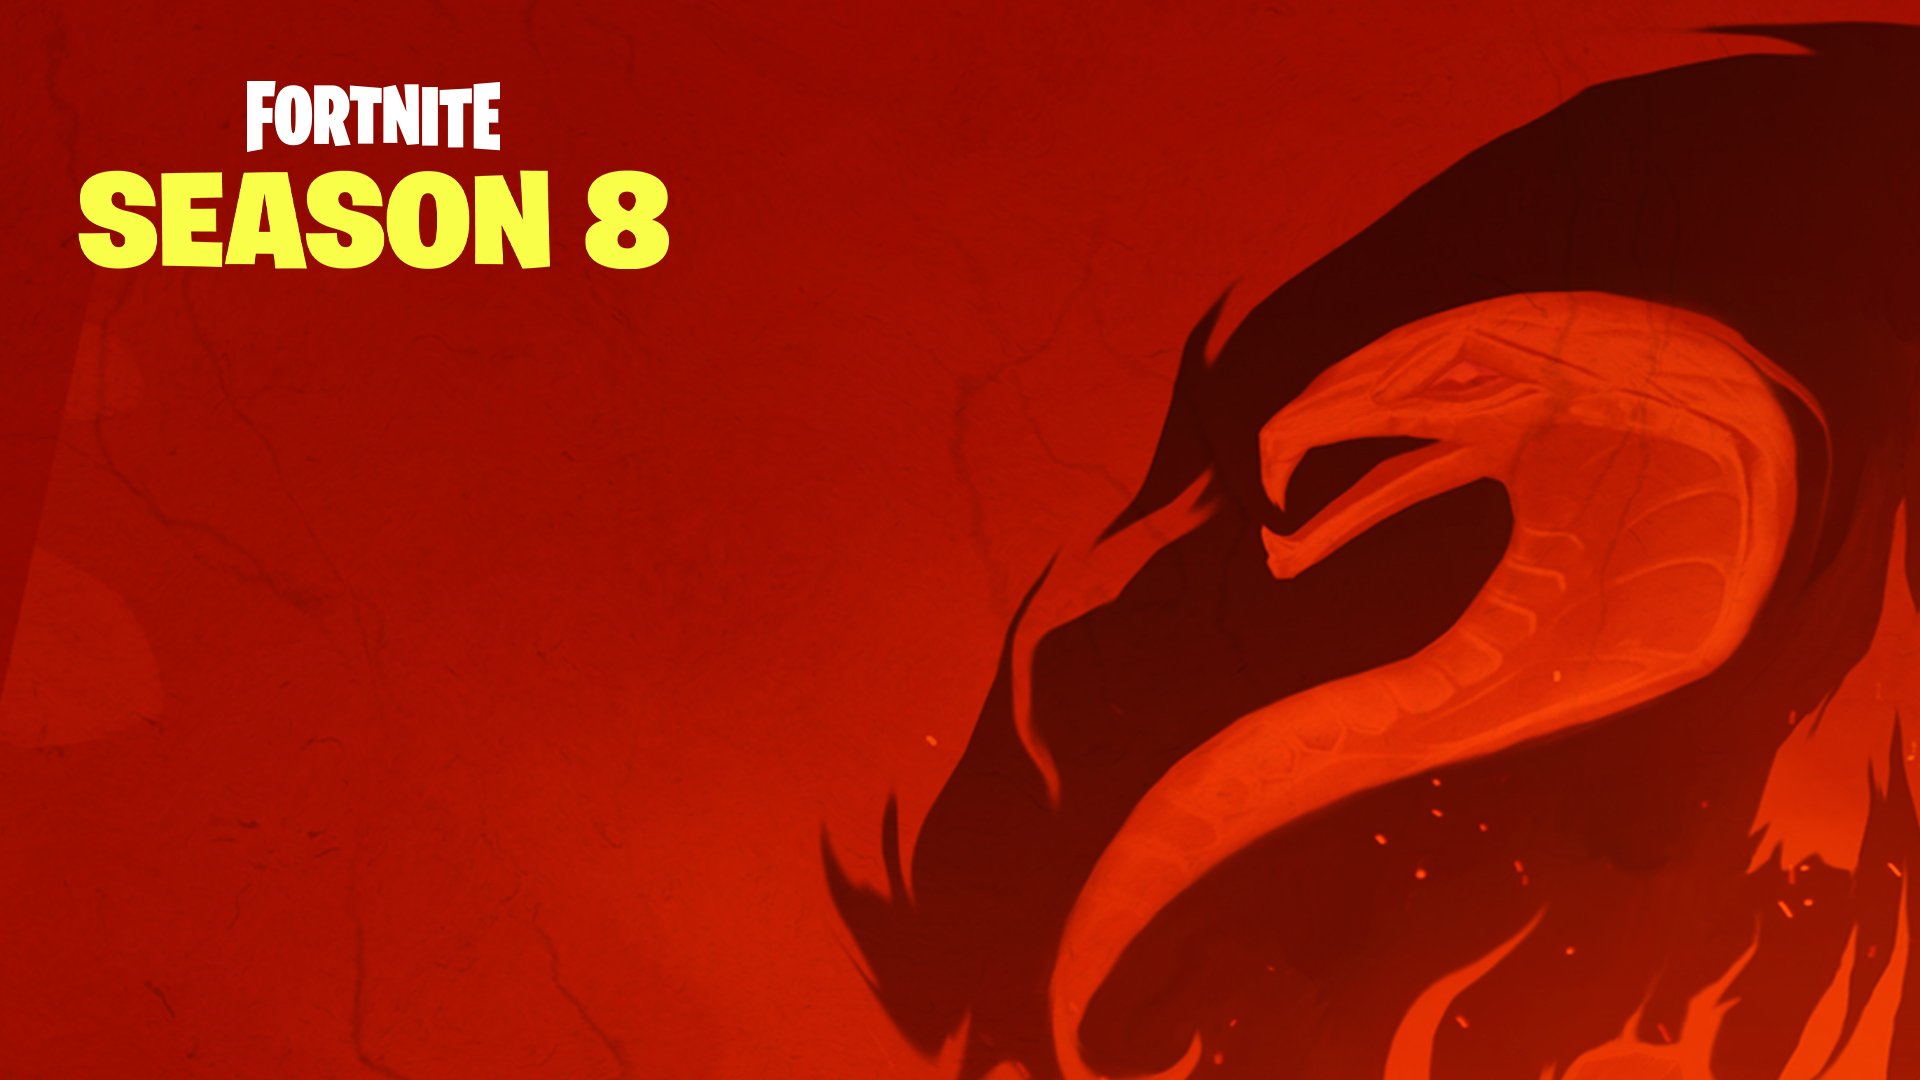 Epic teases exciting changes for Fortnite season 8